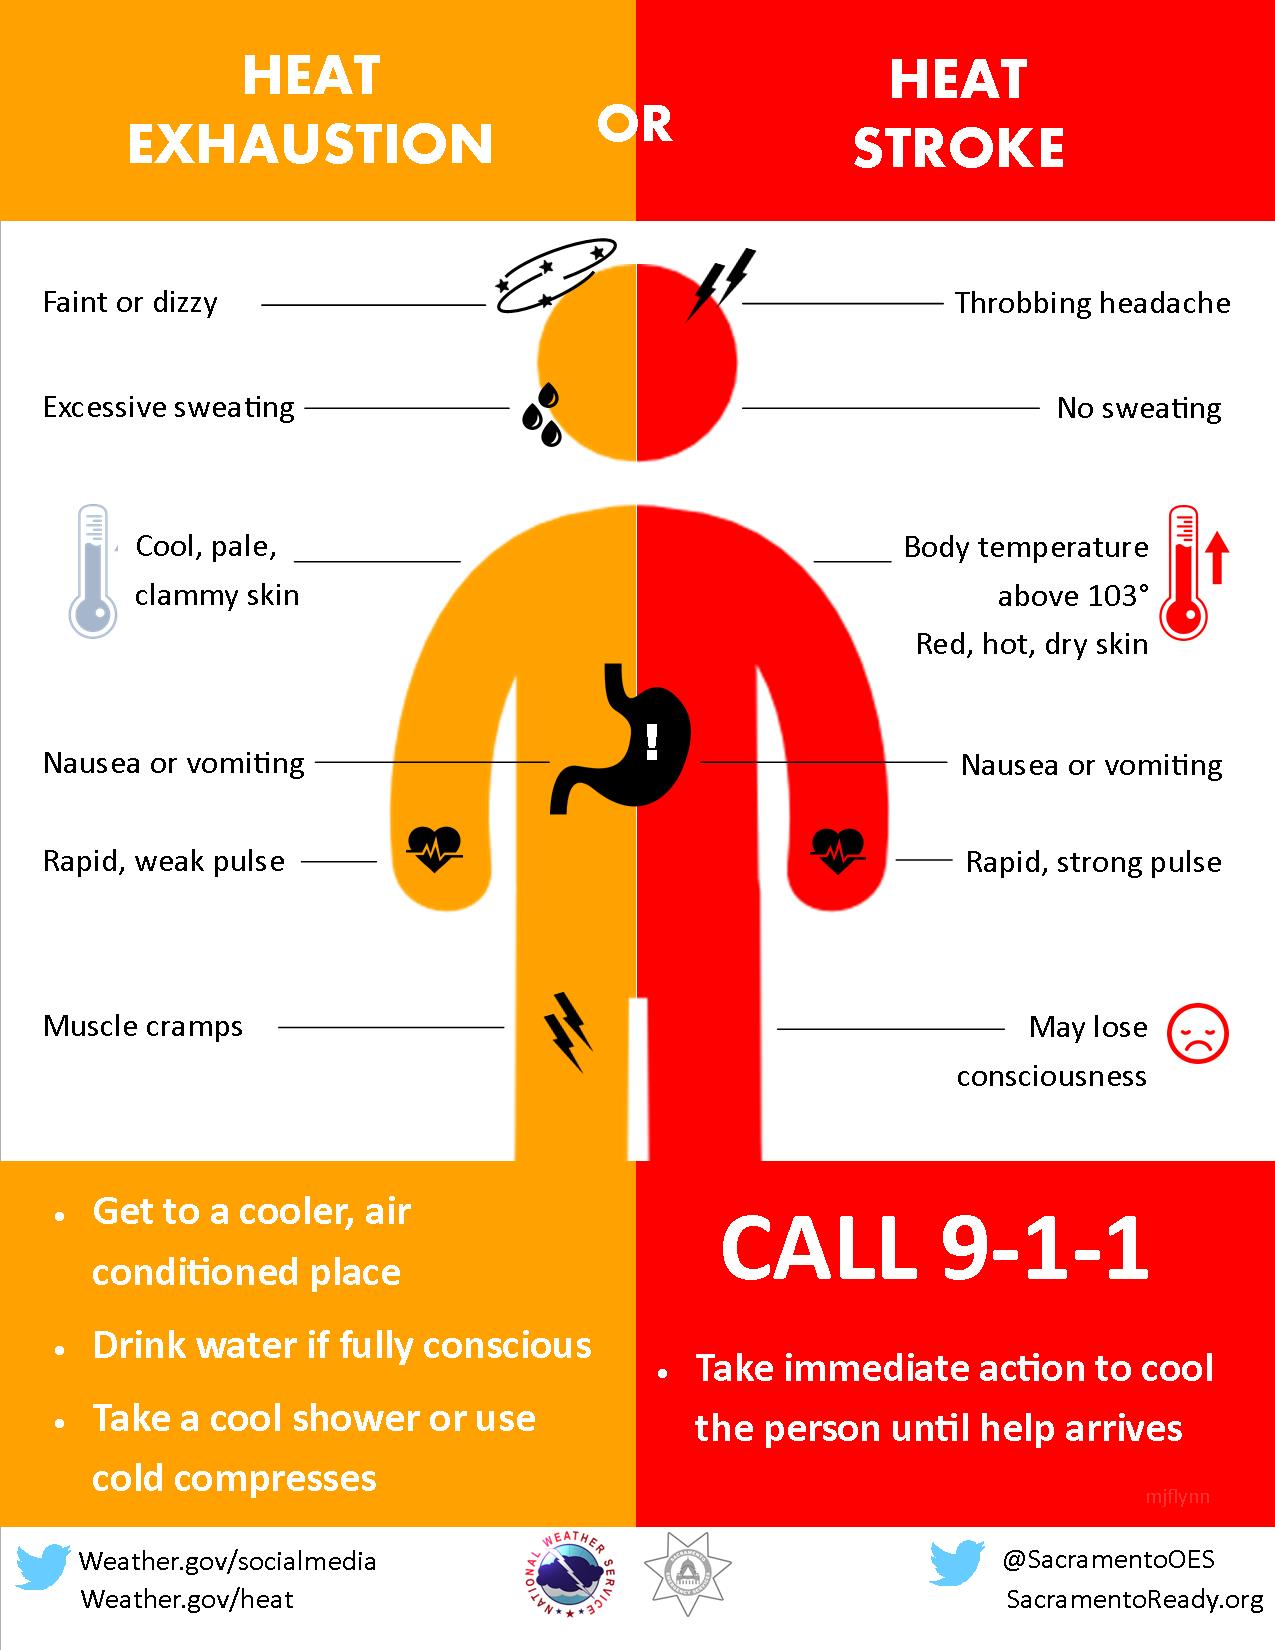 Electrolytes and heat exhaustion